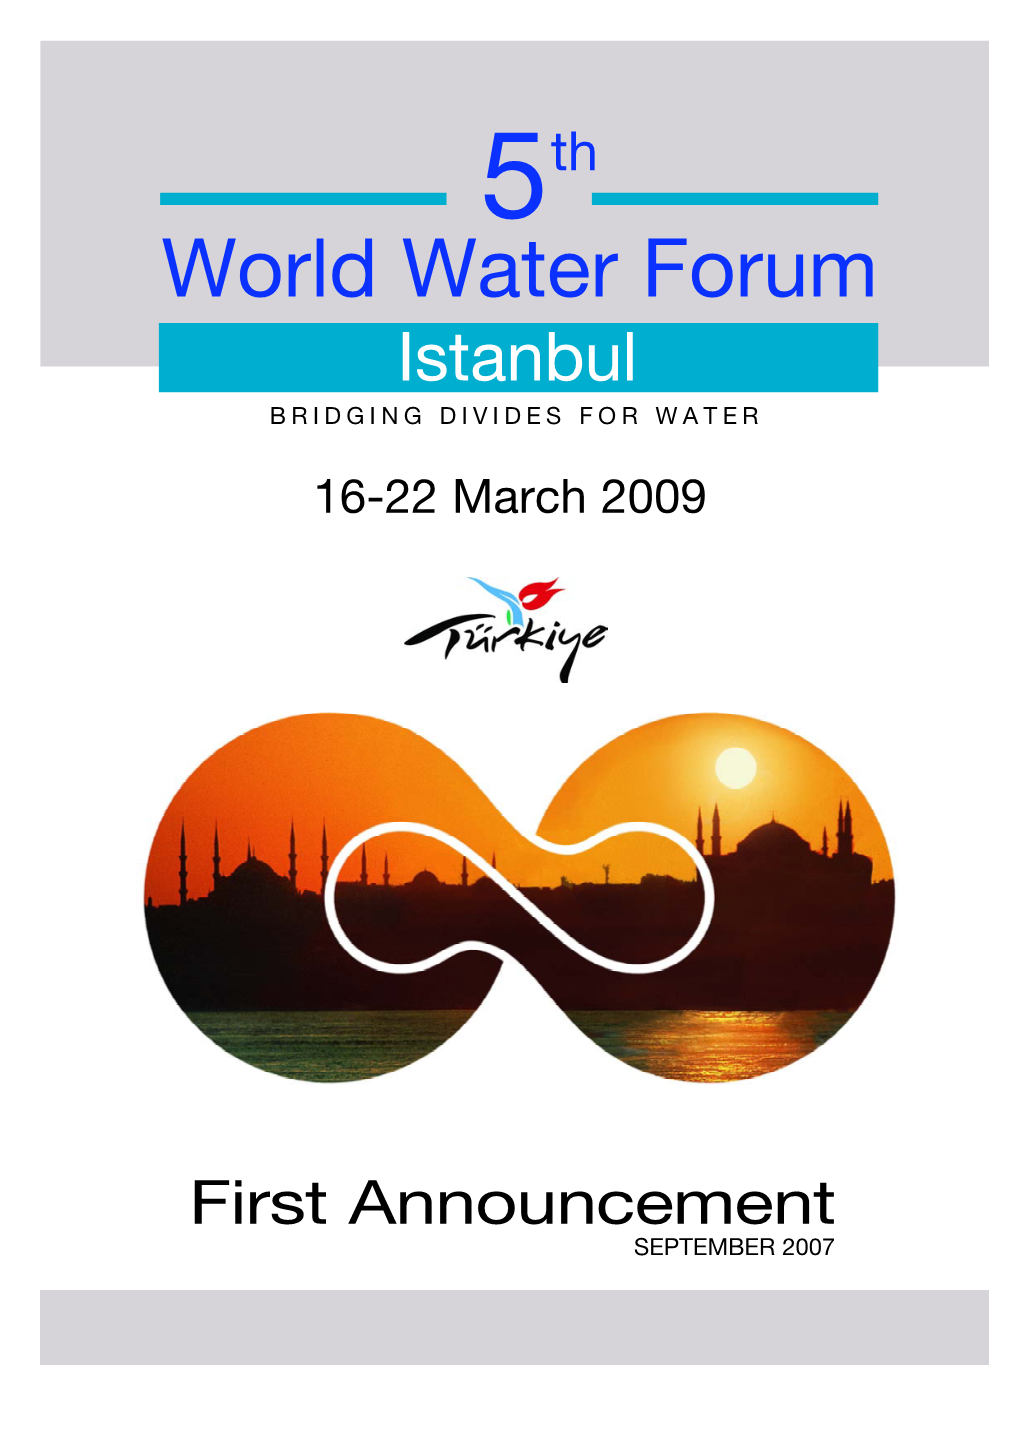 World Water Forum March 2009 Istanbul 5Th World Water Forum Istanbul B R I D G I N G D I V I D E S F O R W a T E R 16-22 March 2009